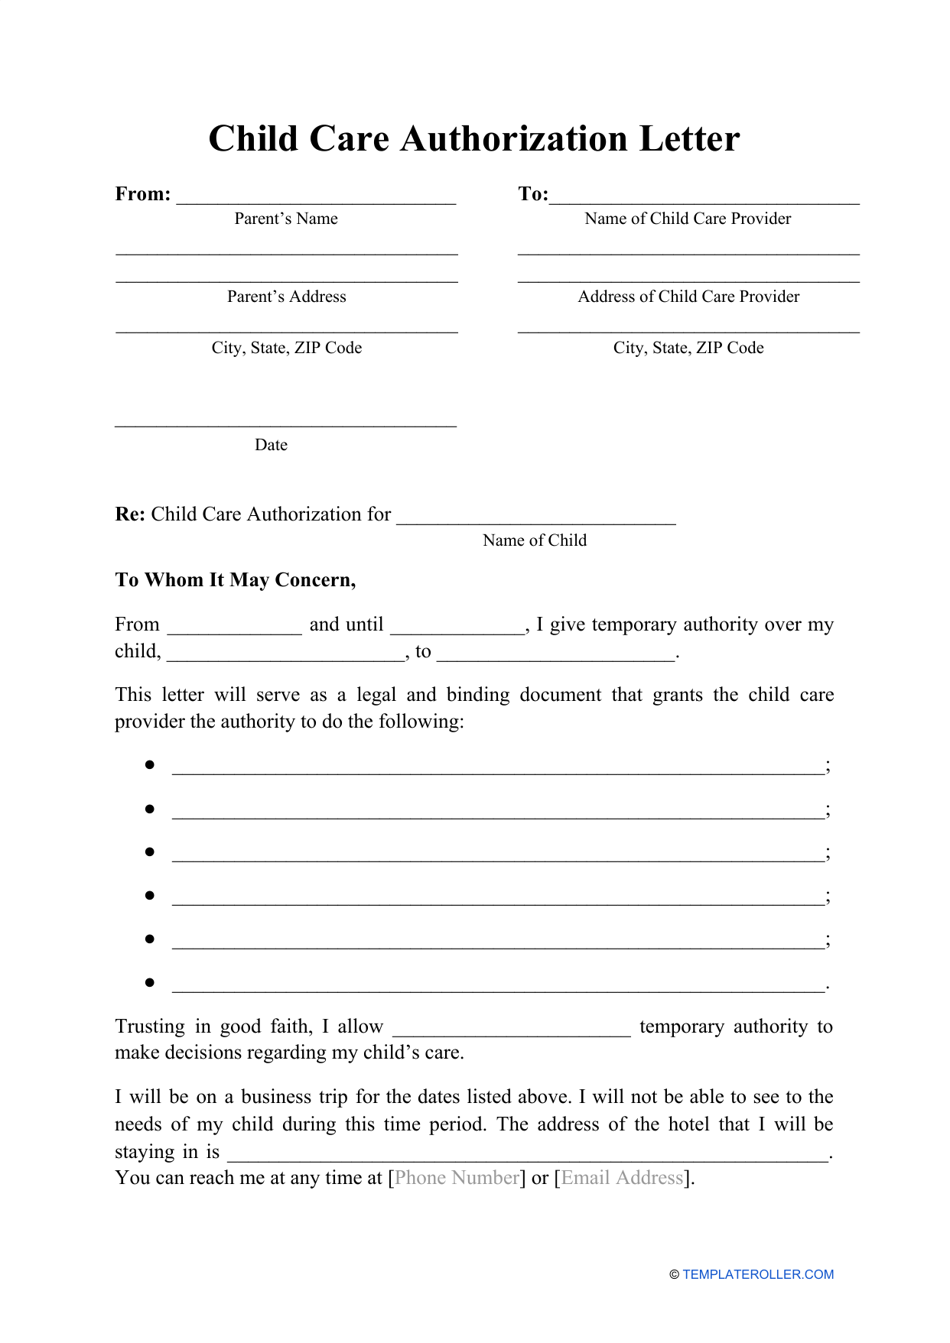 child-care-authorization-letter-template-download-printable-pdf